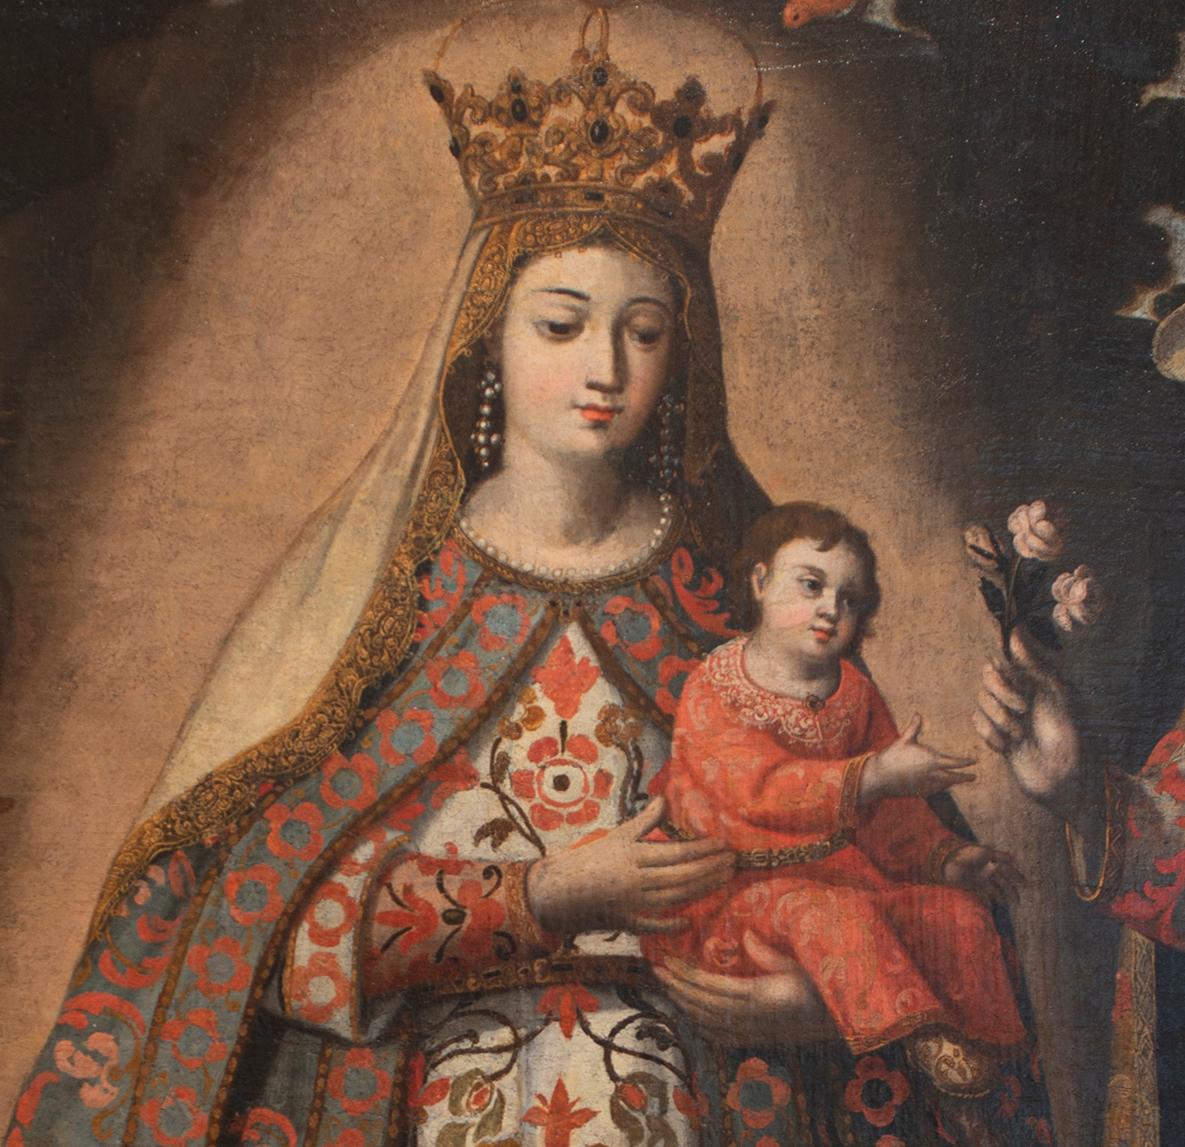 Nuestra Señora de Valvanera, the patroness of the Rioja region of Spain, has been the object of a cult following and pilgrimages since at least the 15th century. The polychromed wood sculpture of her dating from the Romanesque period is enshrined in